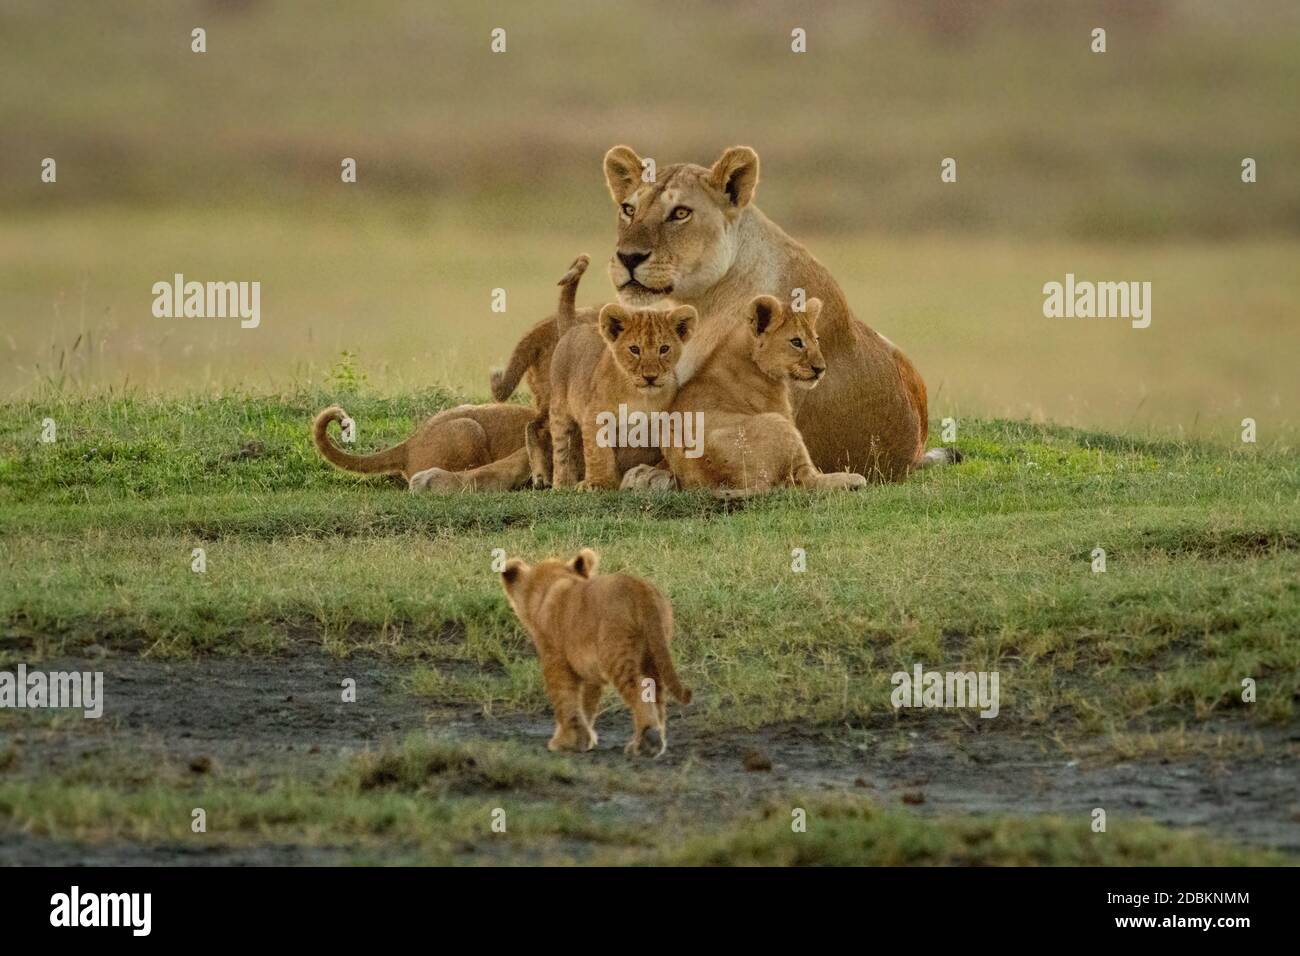 Cub walks towards others lying with lioness Stock Photo